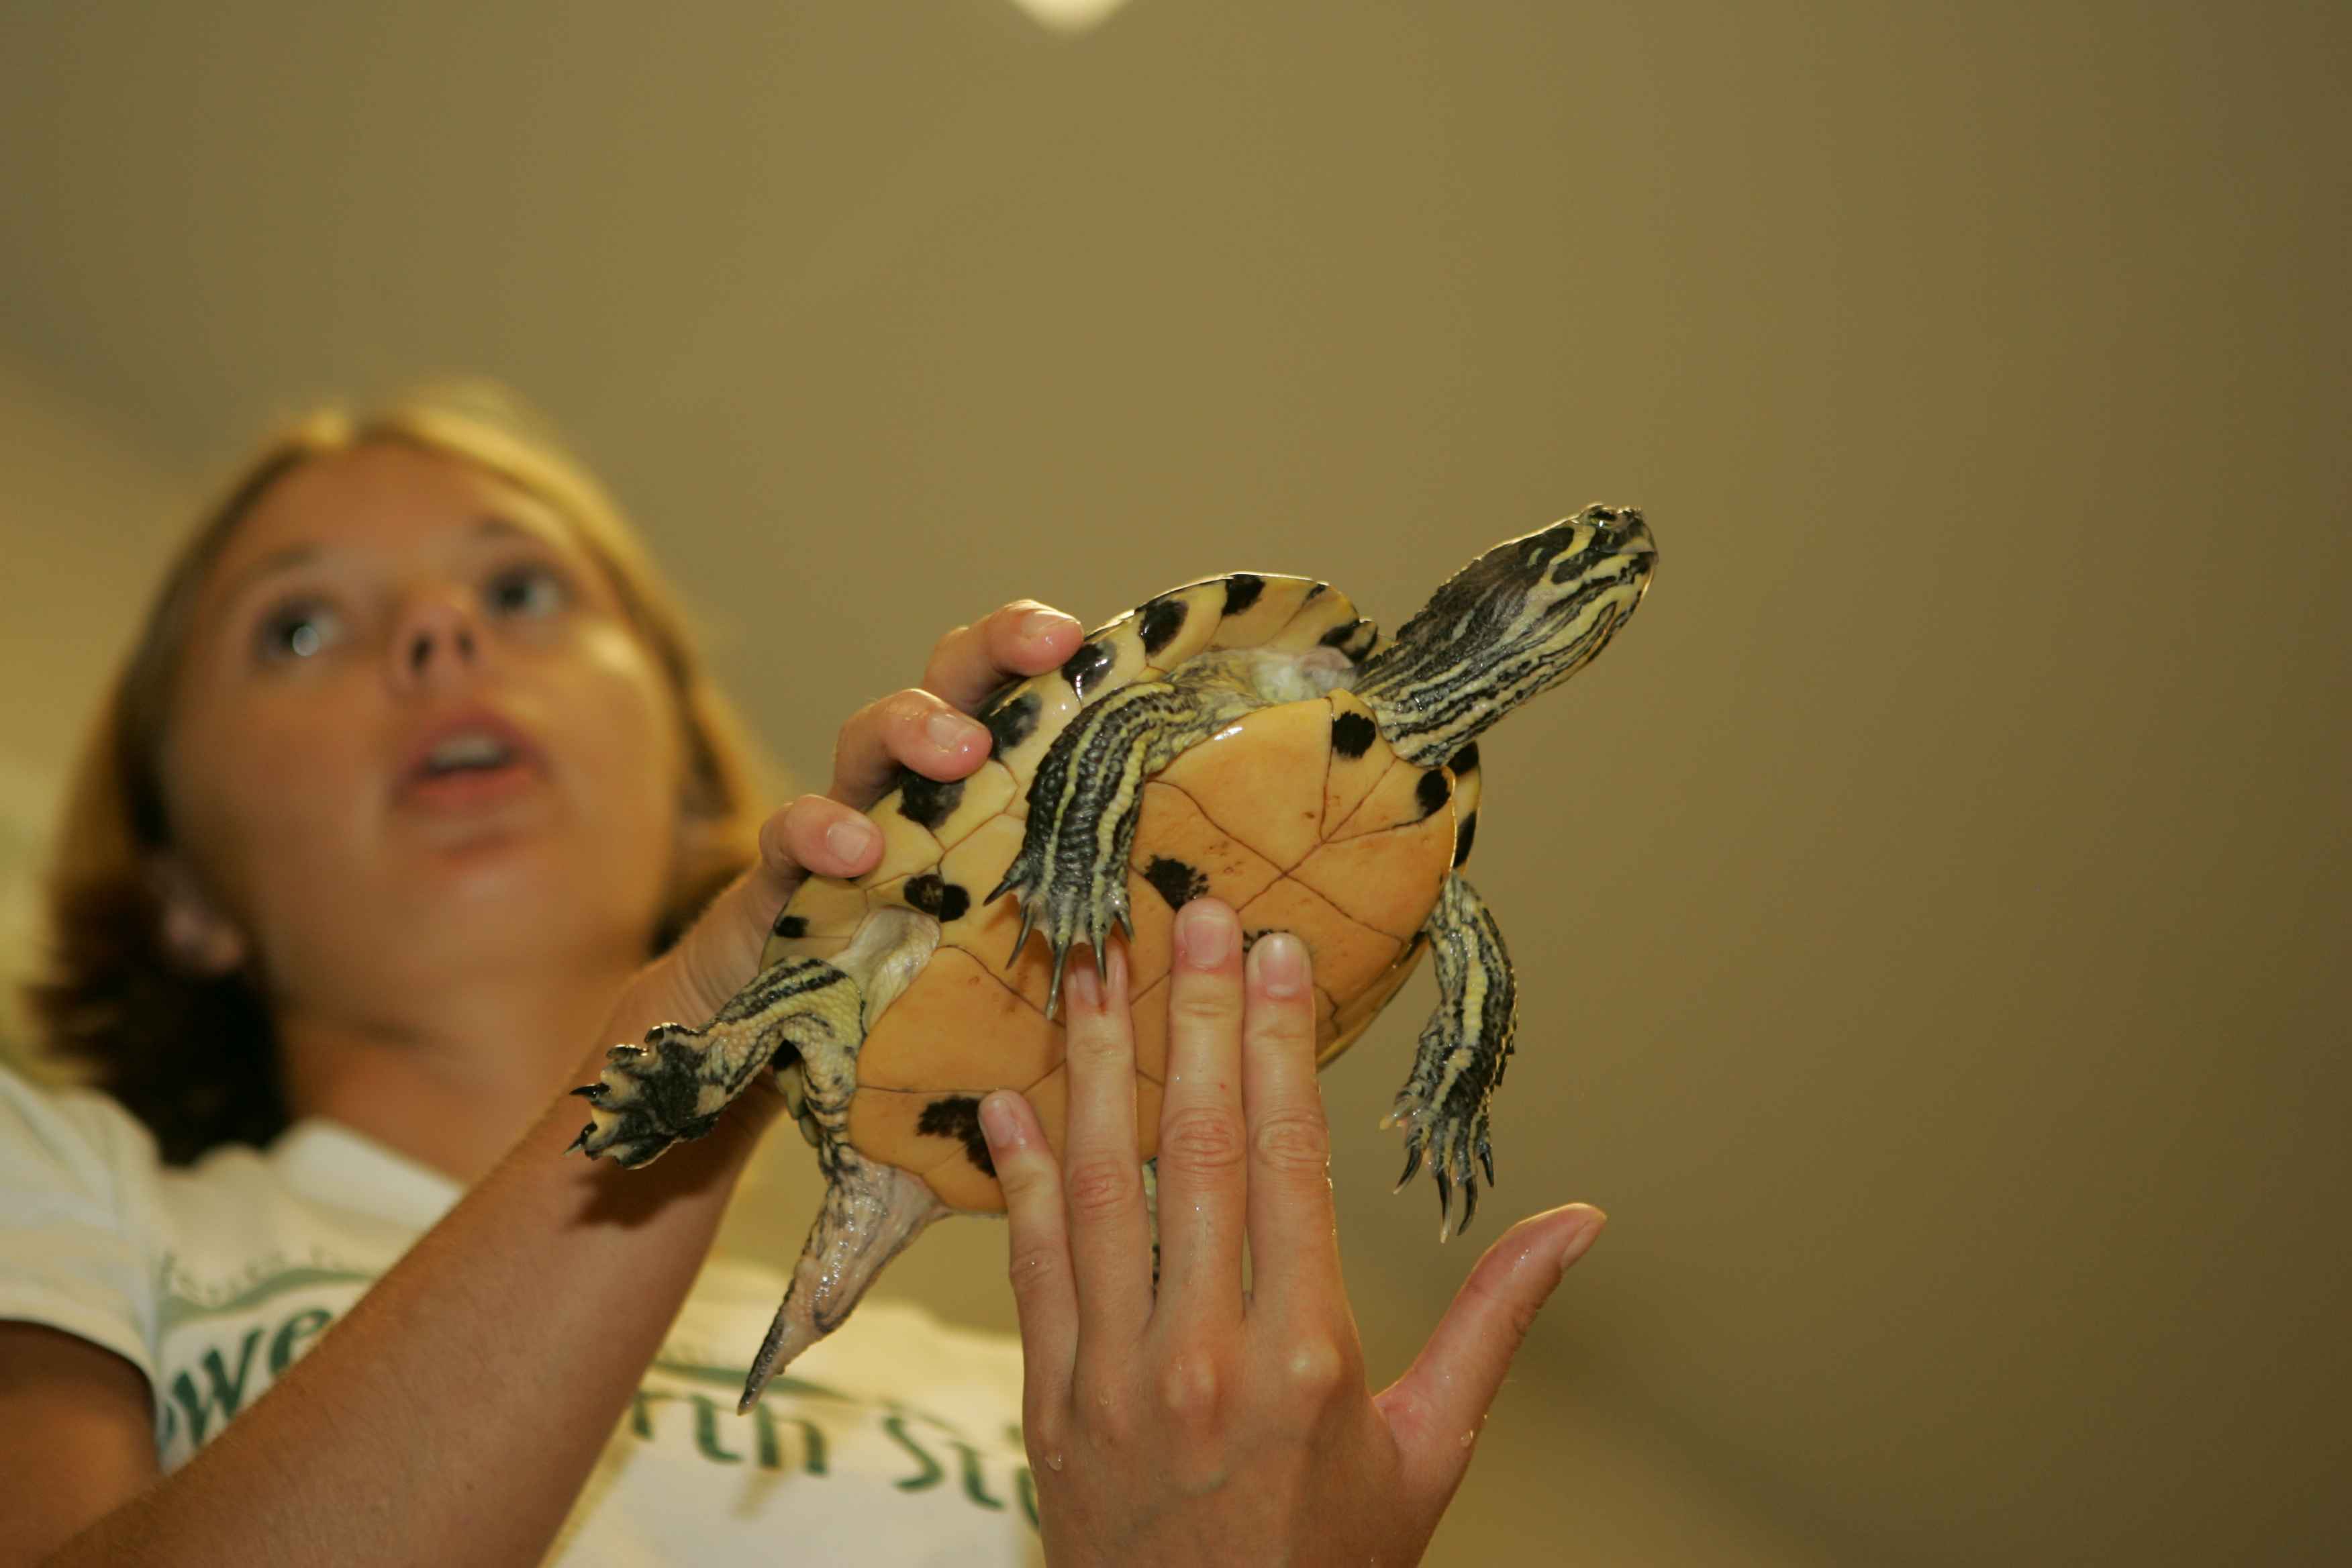 A young girl handles a turtle